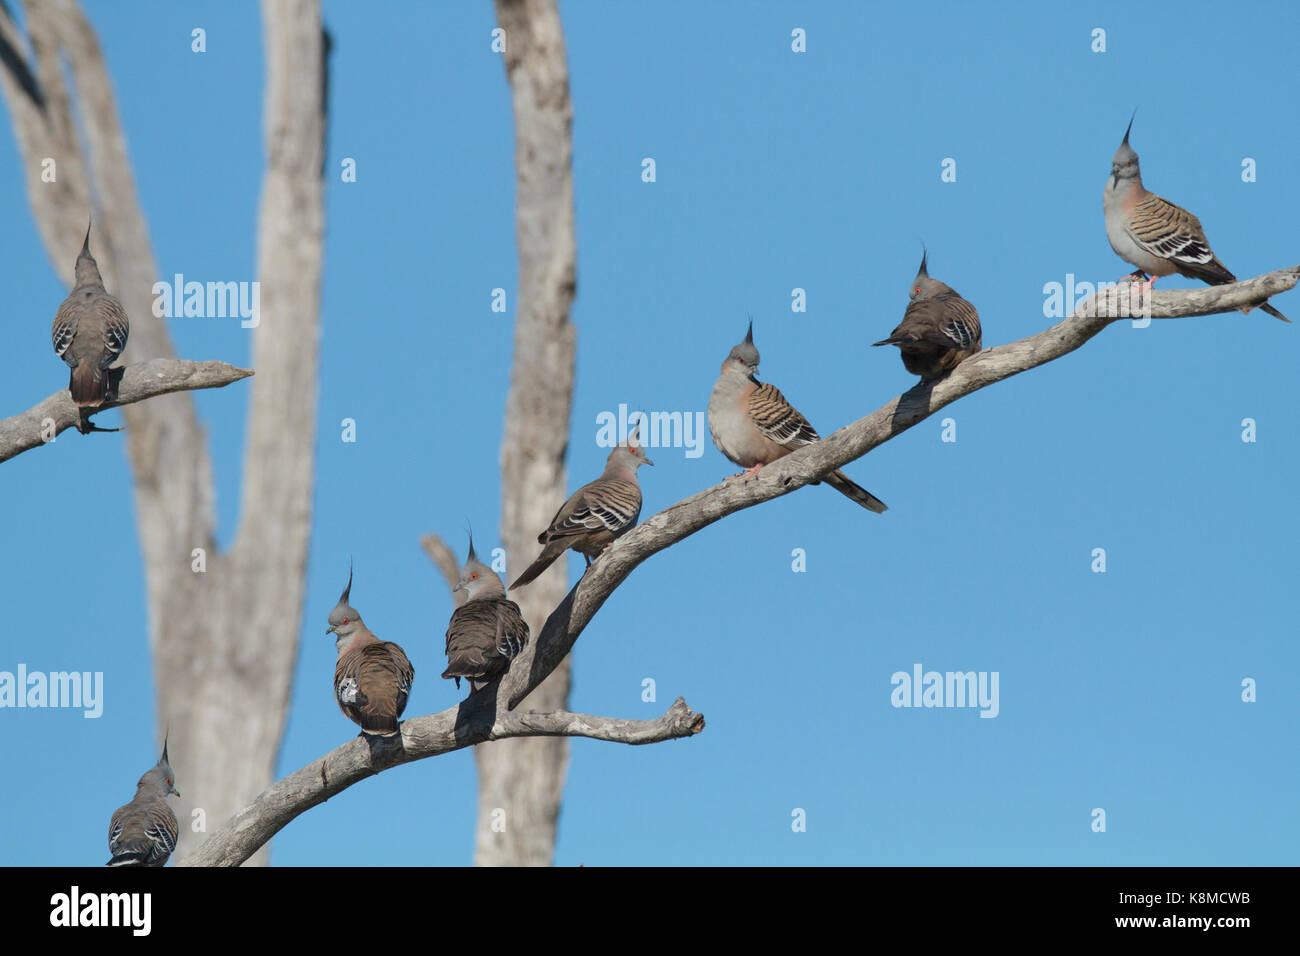 A flock of Crested Pigeons, Ocyphaps lophotes,  perched in a tree near an outback Wetlands in Western Queensland Stock Photo